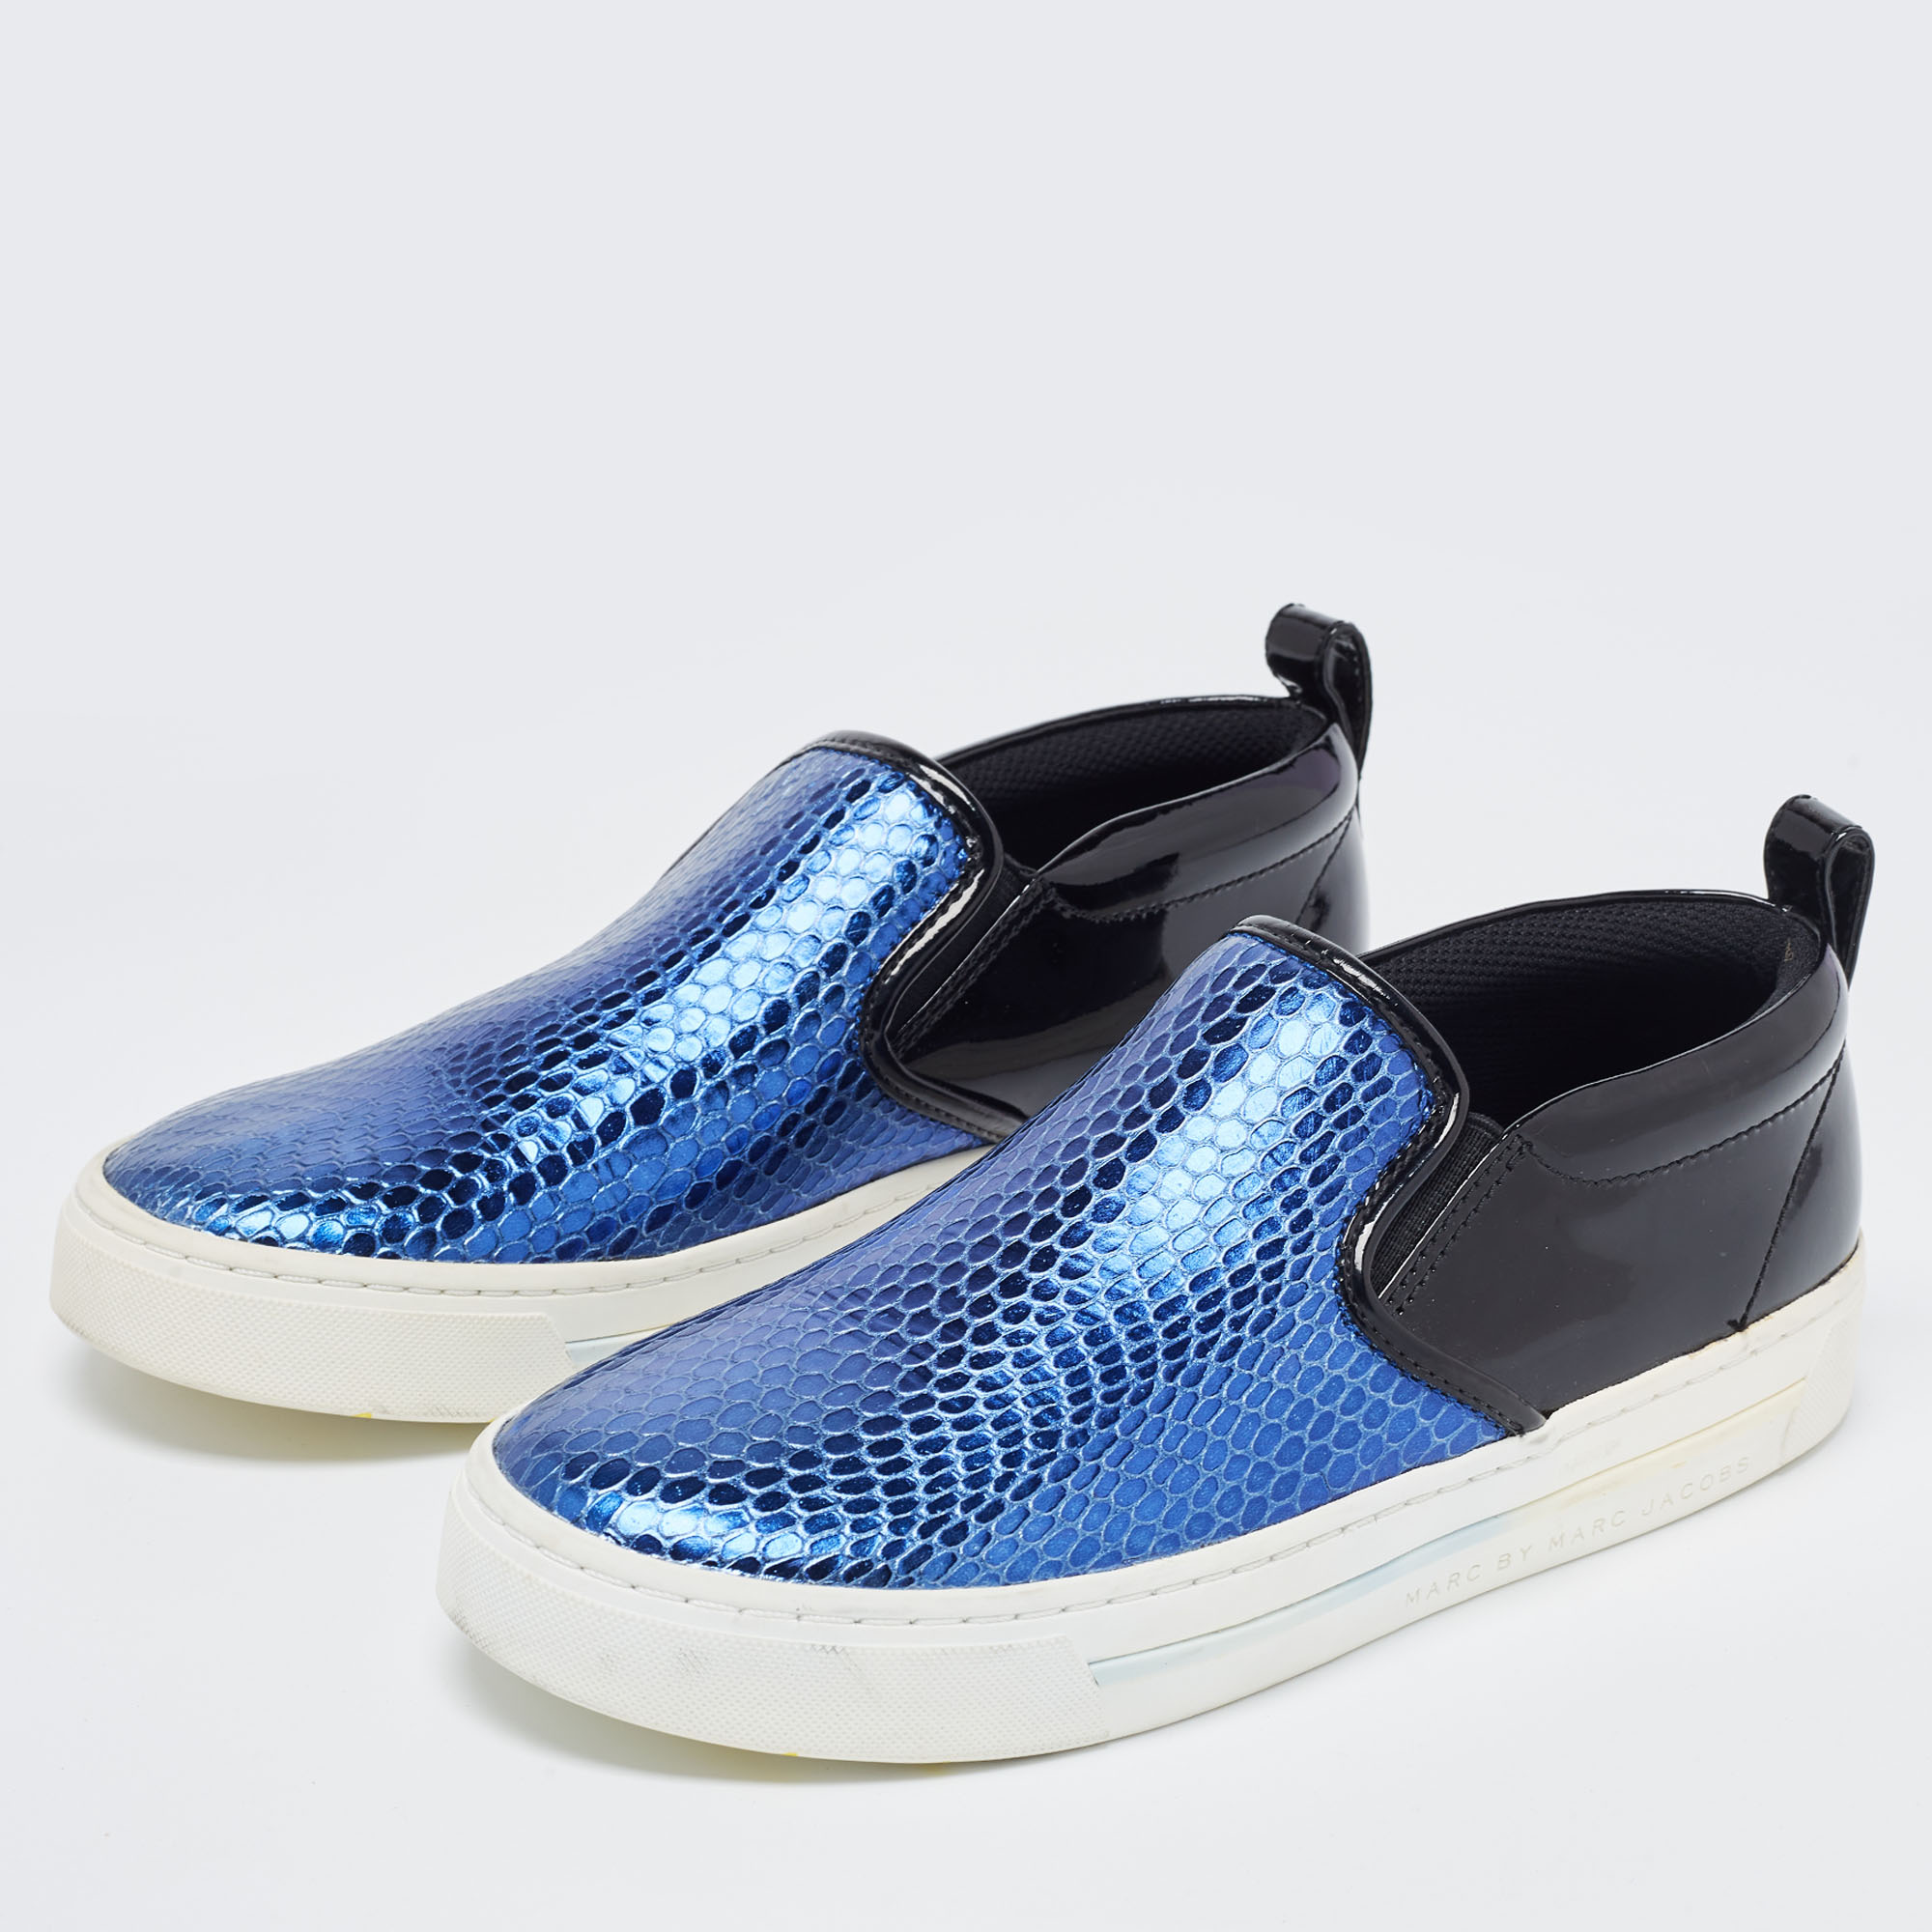 

Marc by Marc Jacobs Metallic Blue/Black Python Embossed and Patent Leather Broome Sneakers Size